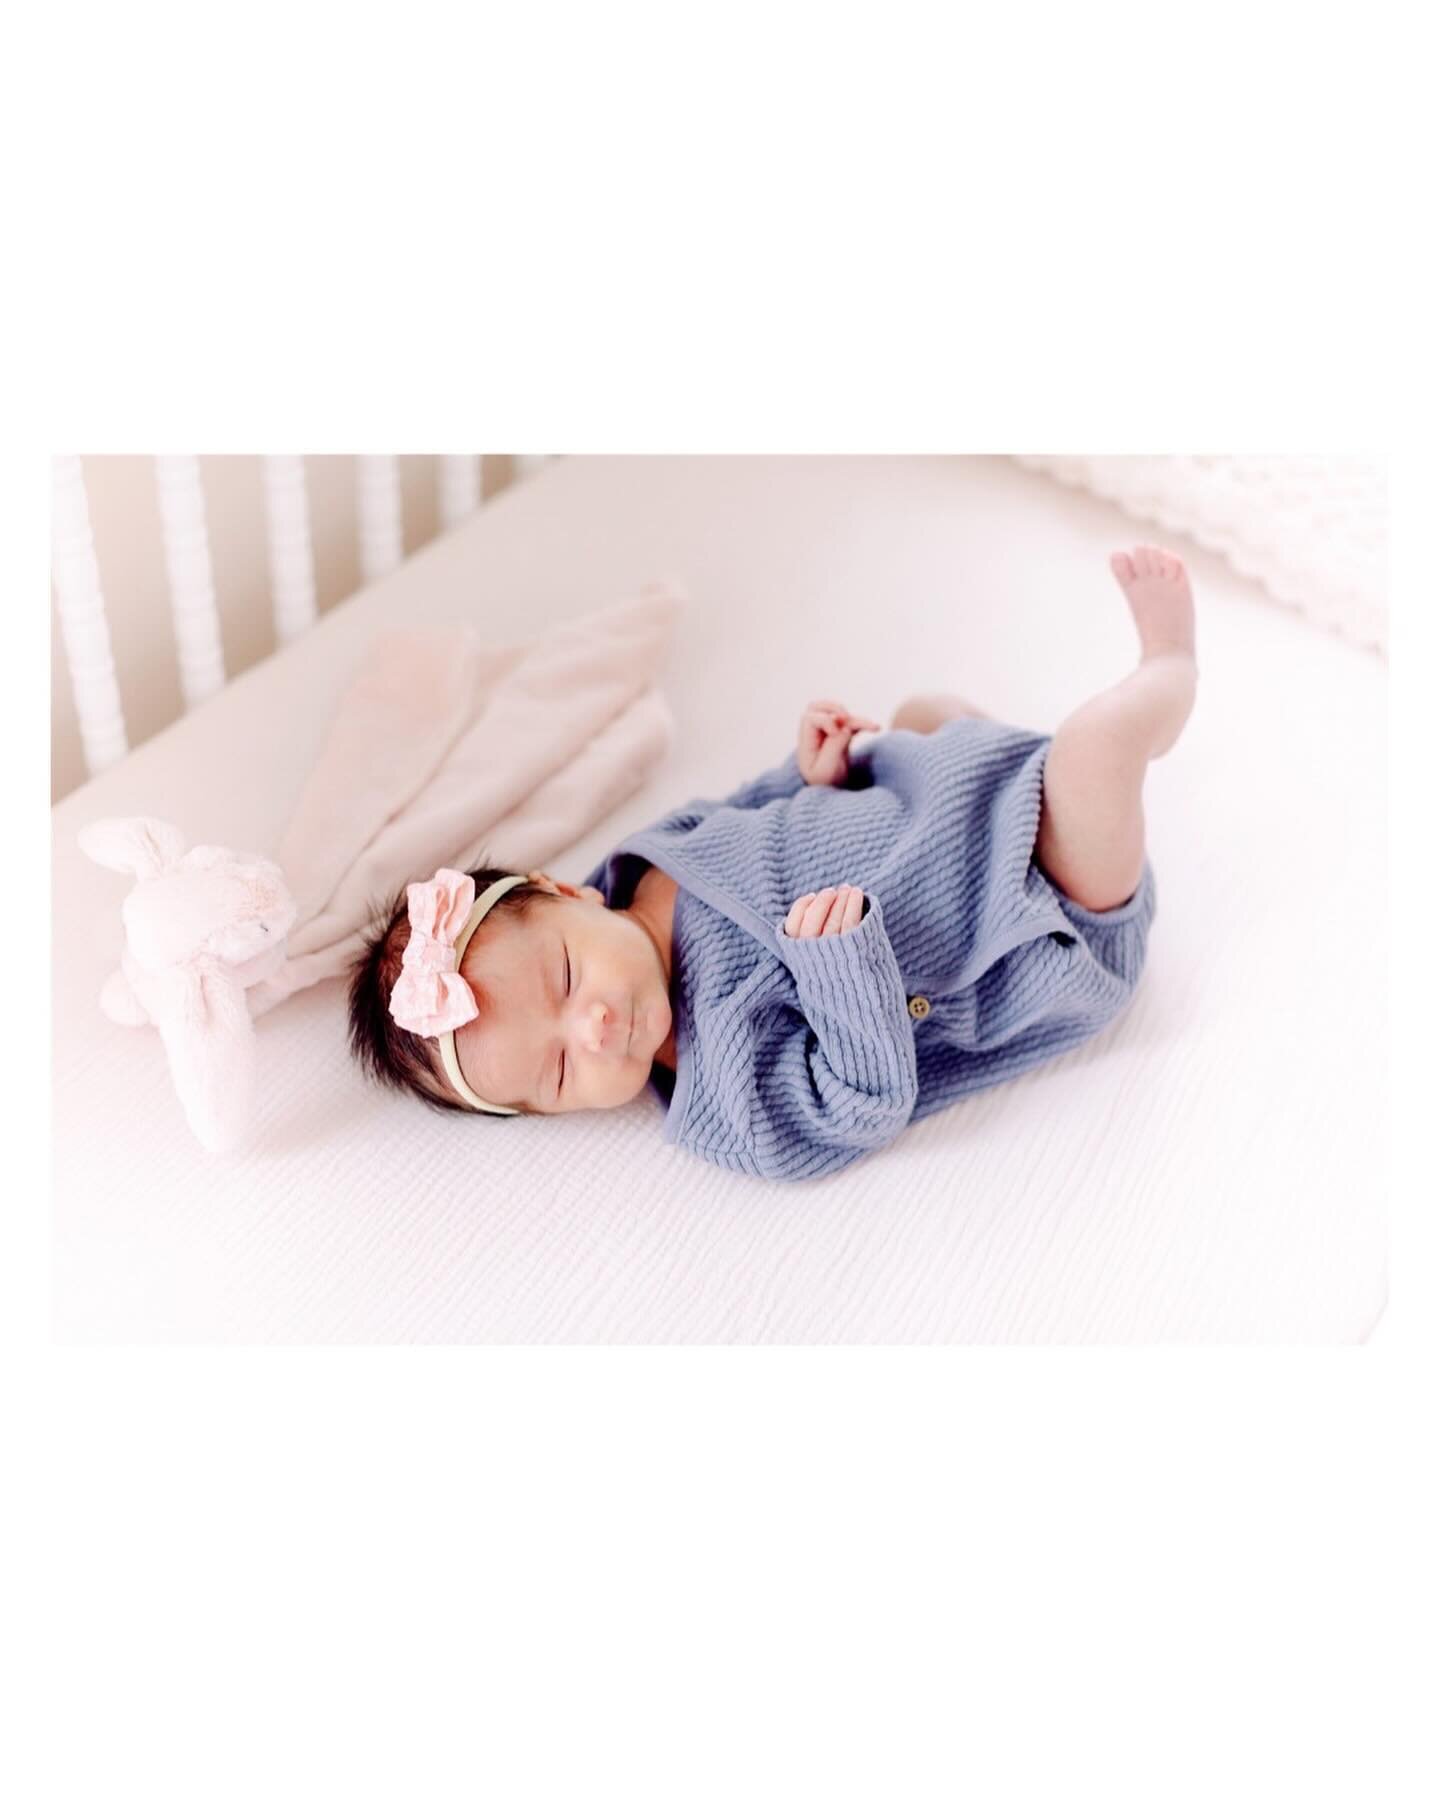 I spent an enormously adorable and snuggly morning at home with the Tang family to celebrate Rosalie Mei🎀 words can&rsquo;t quite describe the utter cuteness of this situation so I&rsquo;ll let you add your own squeals and sighs as you swipe on thro